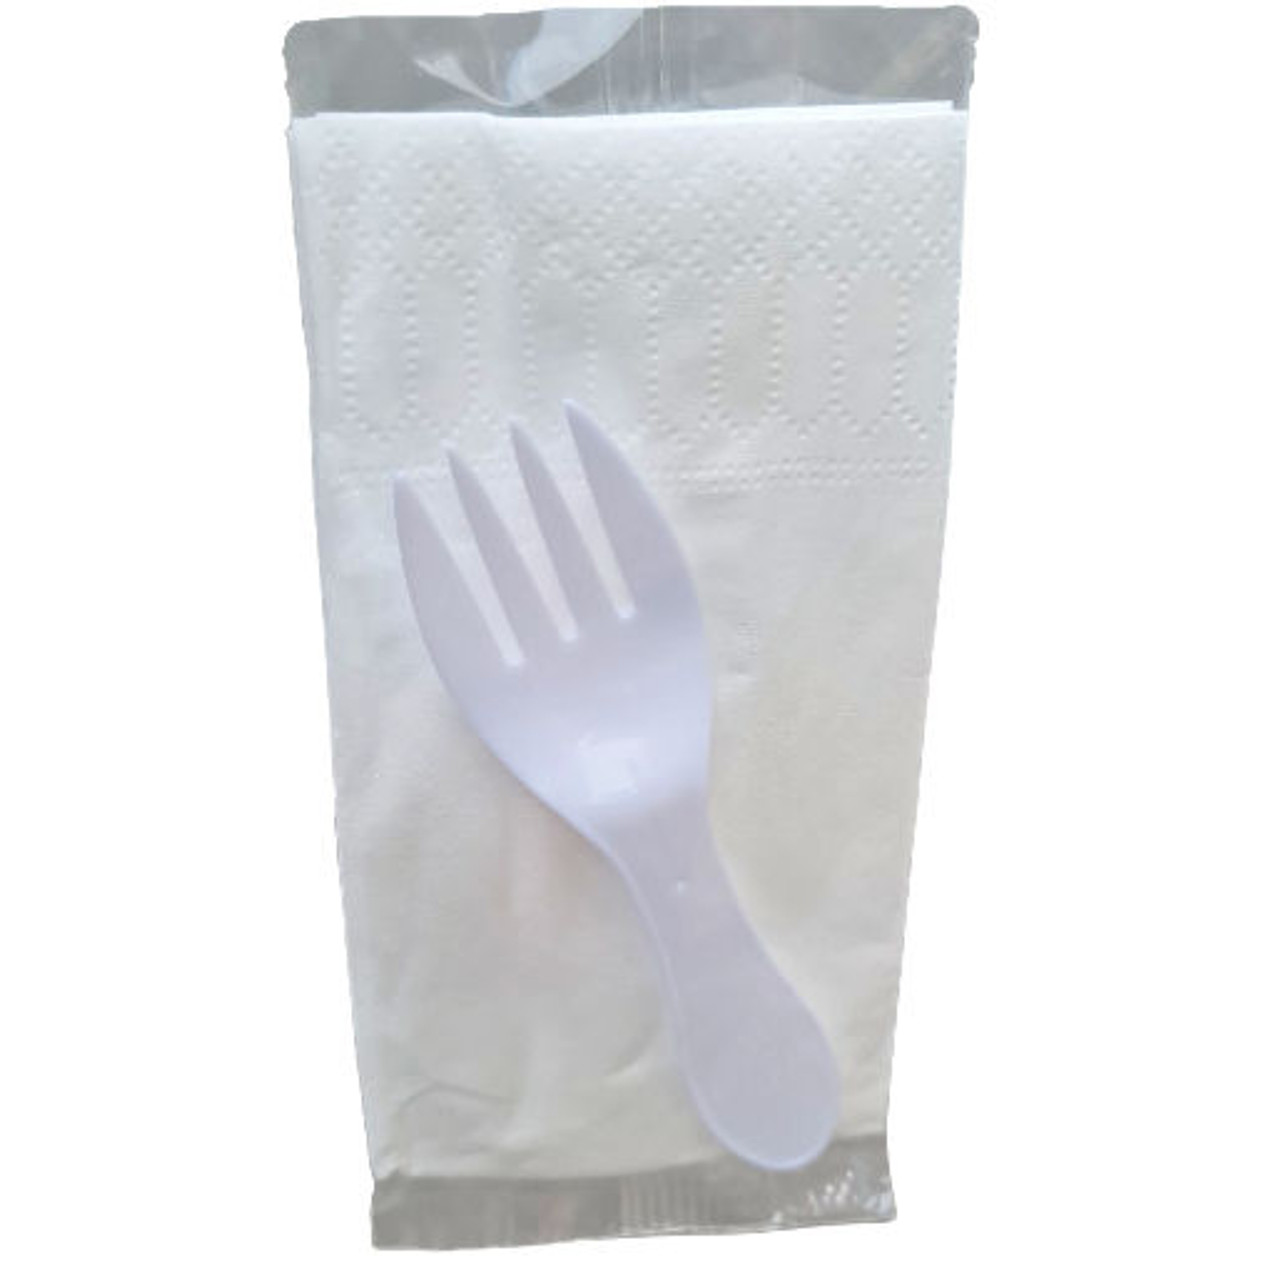 Case x 500 Packs of Individually Wrapped Spork and Napkin